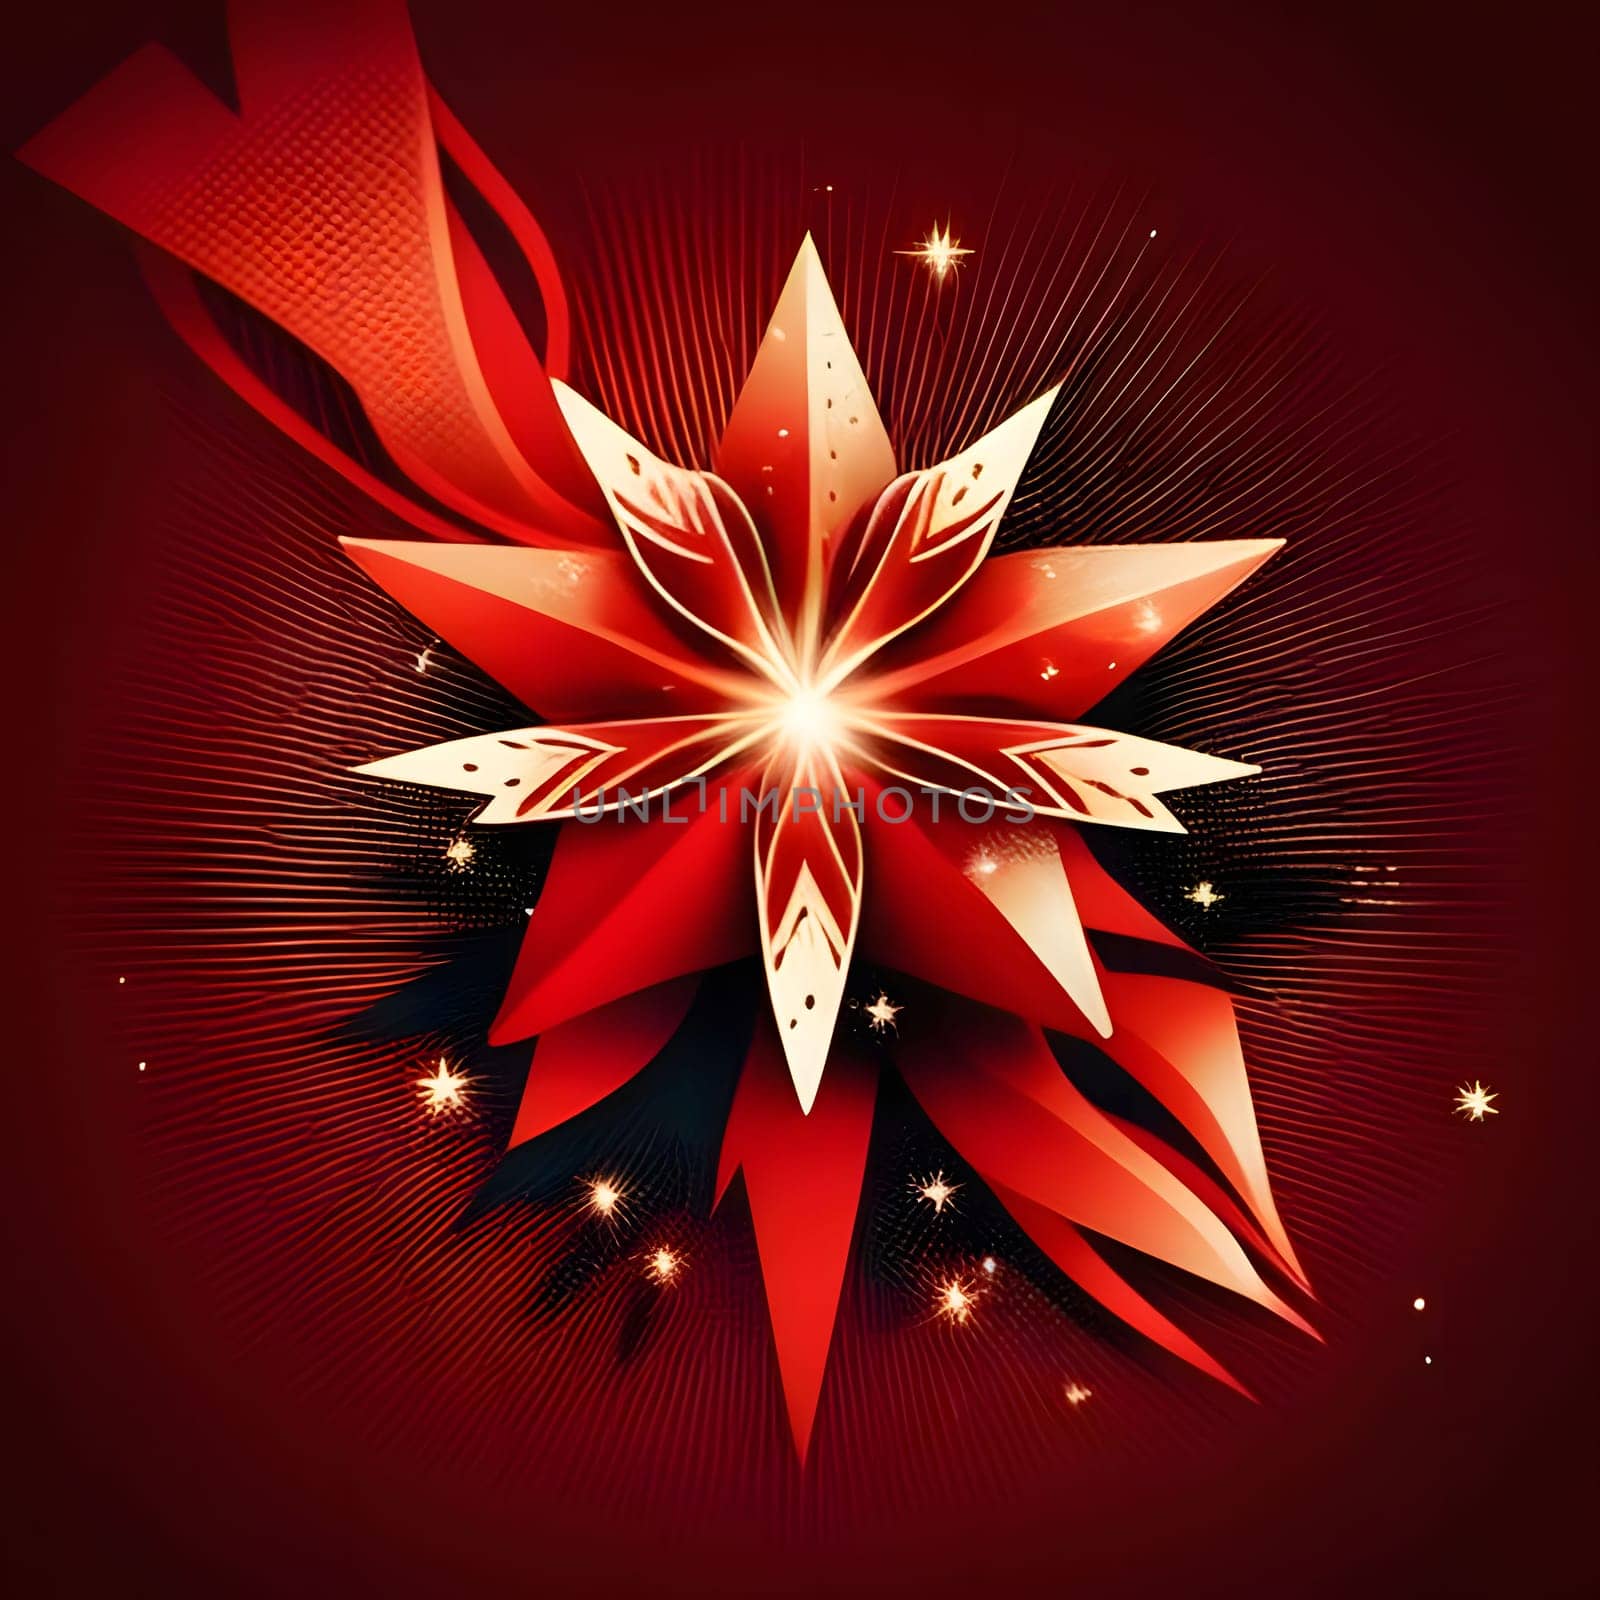 Red star, abstract. The Christmas star as a symbol of the birth of the savior. A Time of Joy and Celebration.